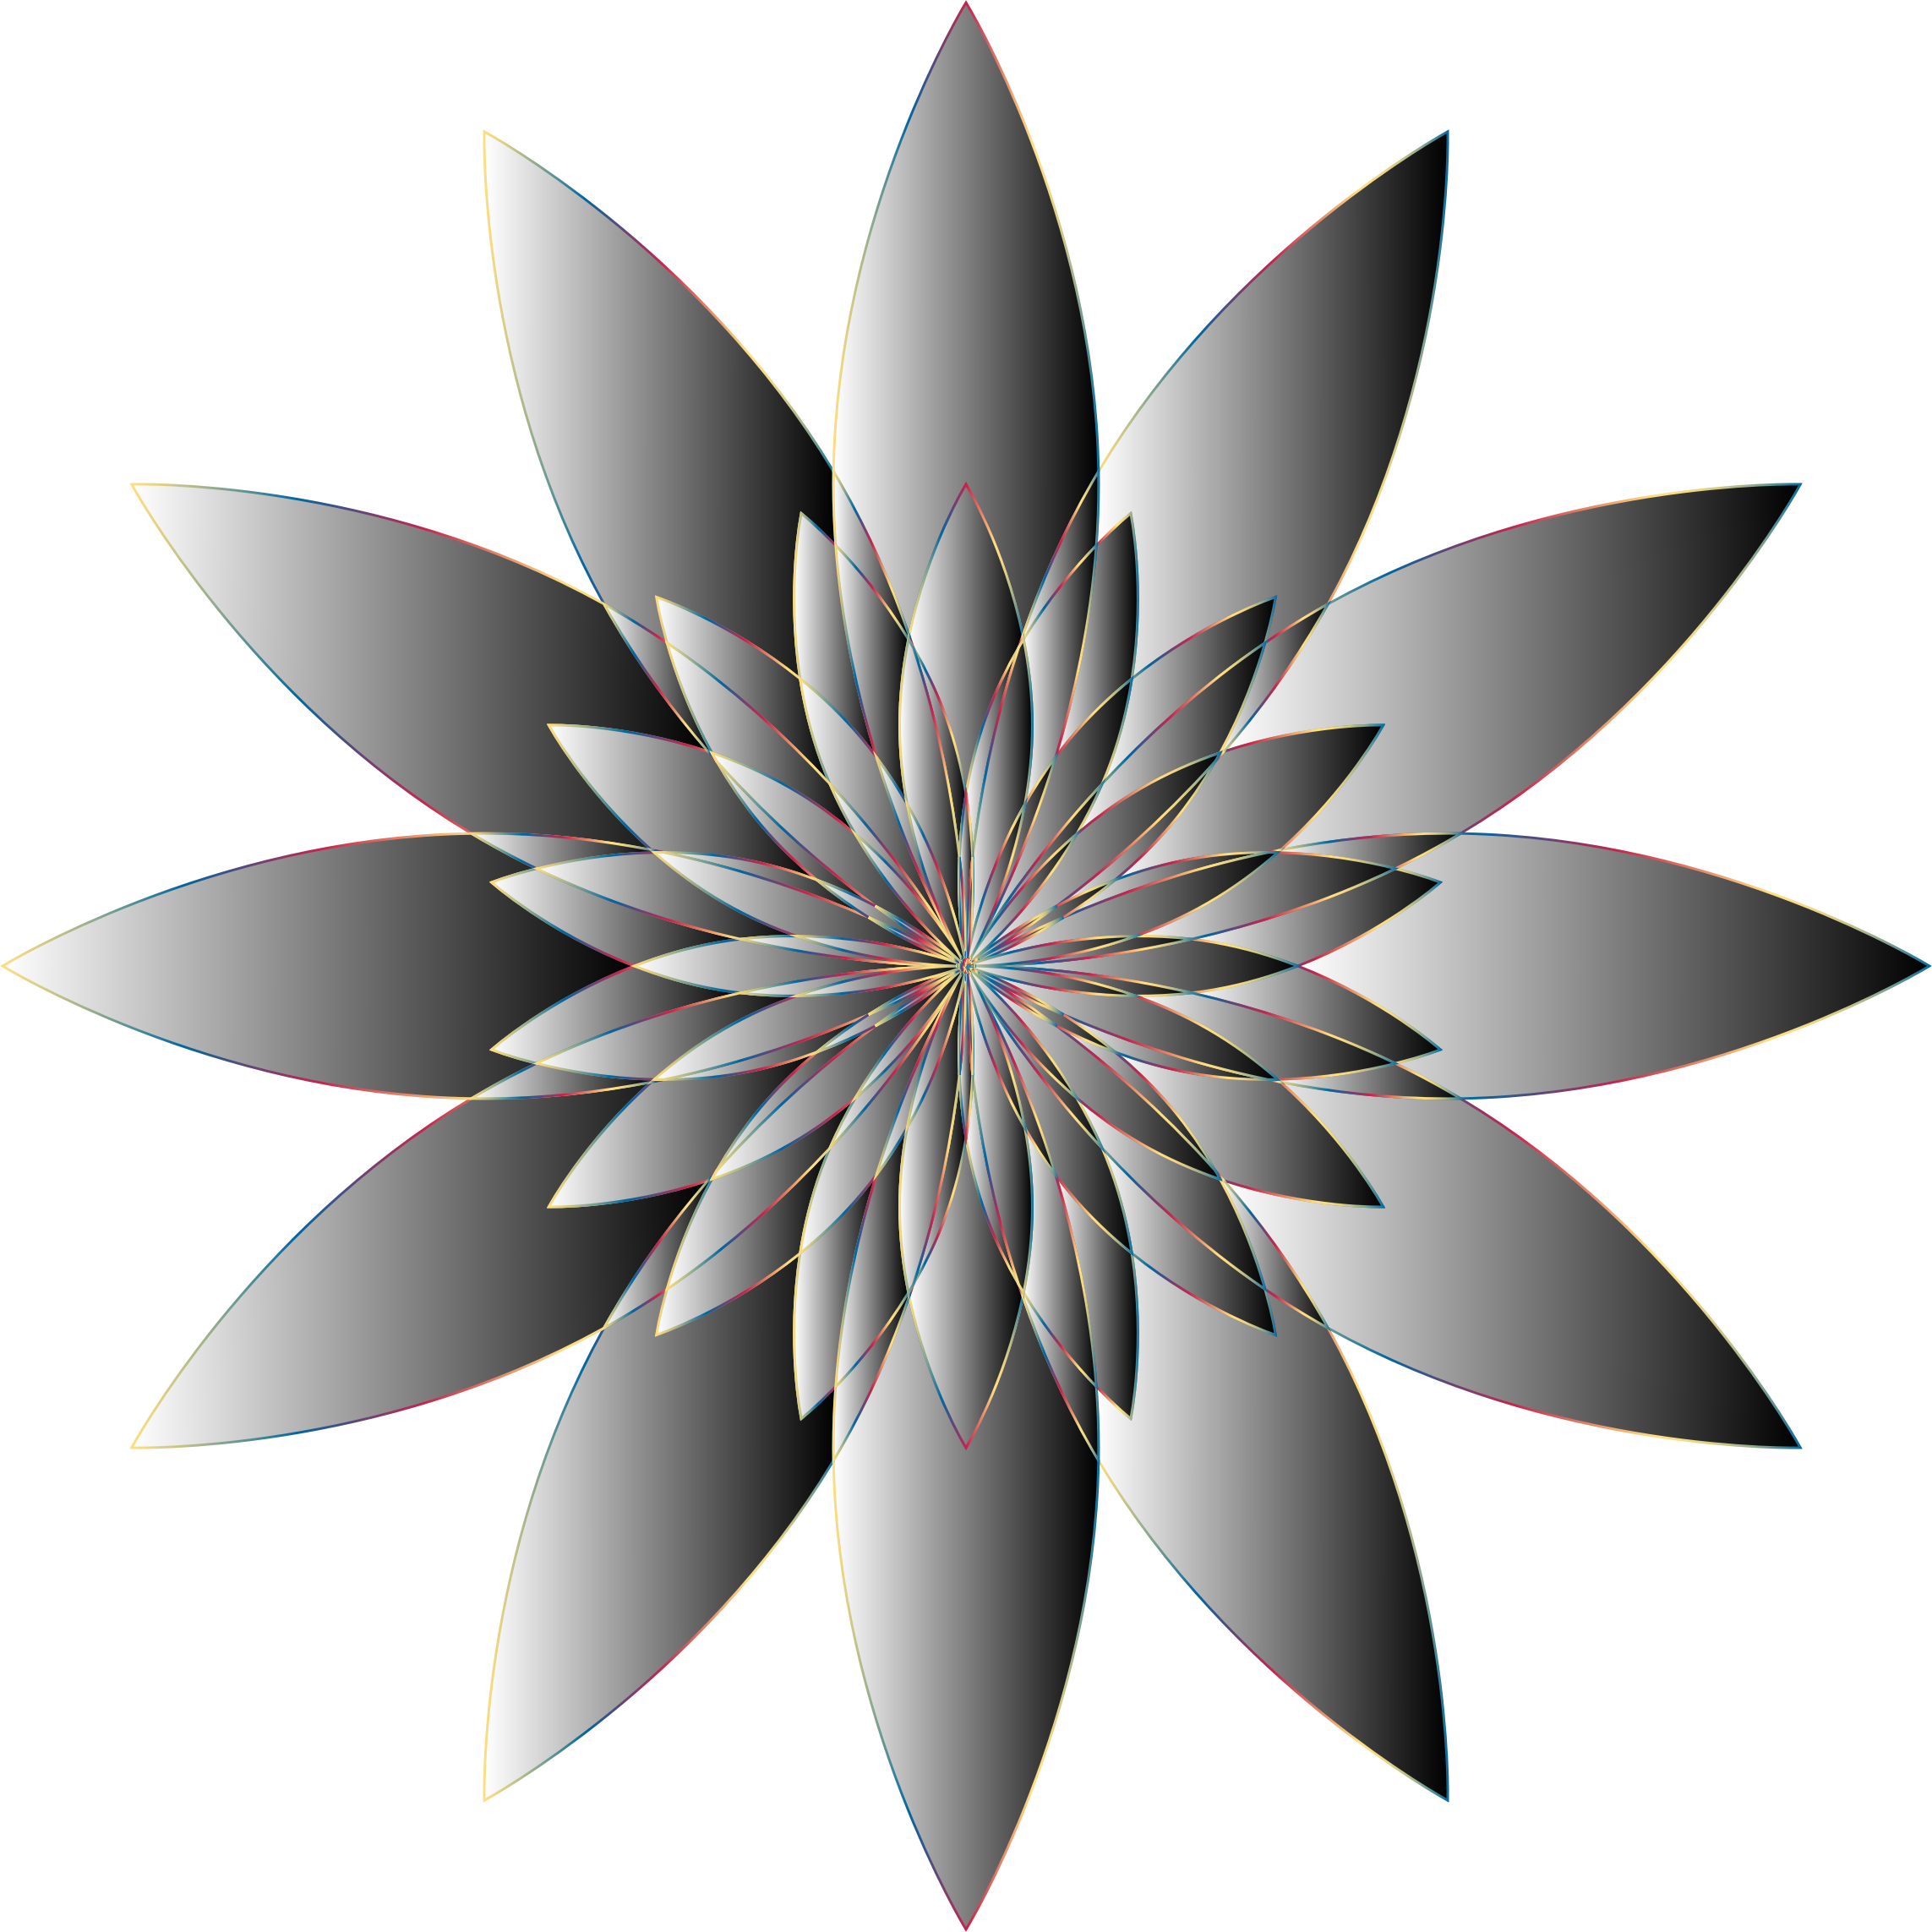 Chromatic Flower 16 No Background - Portable Network Graphics (2286x2286)